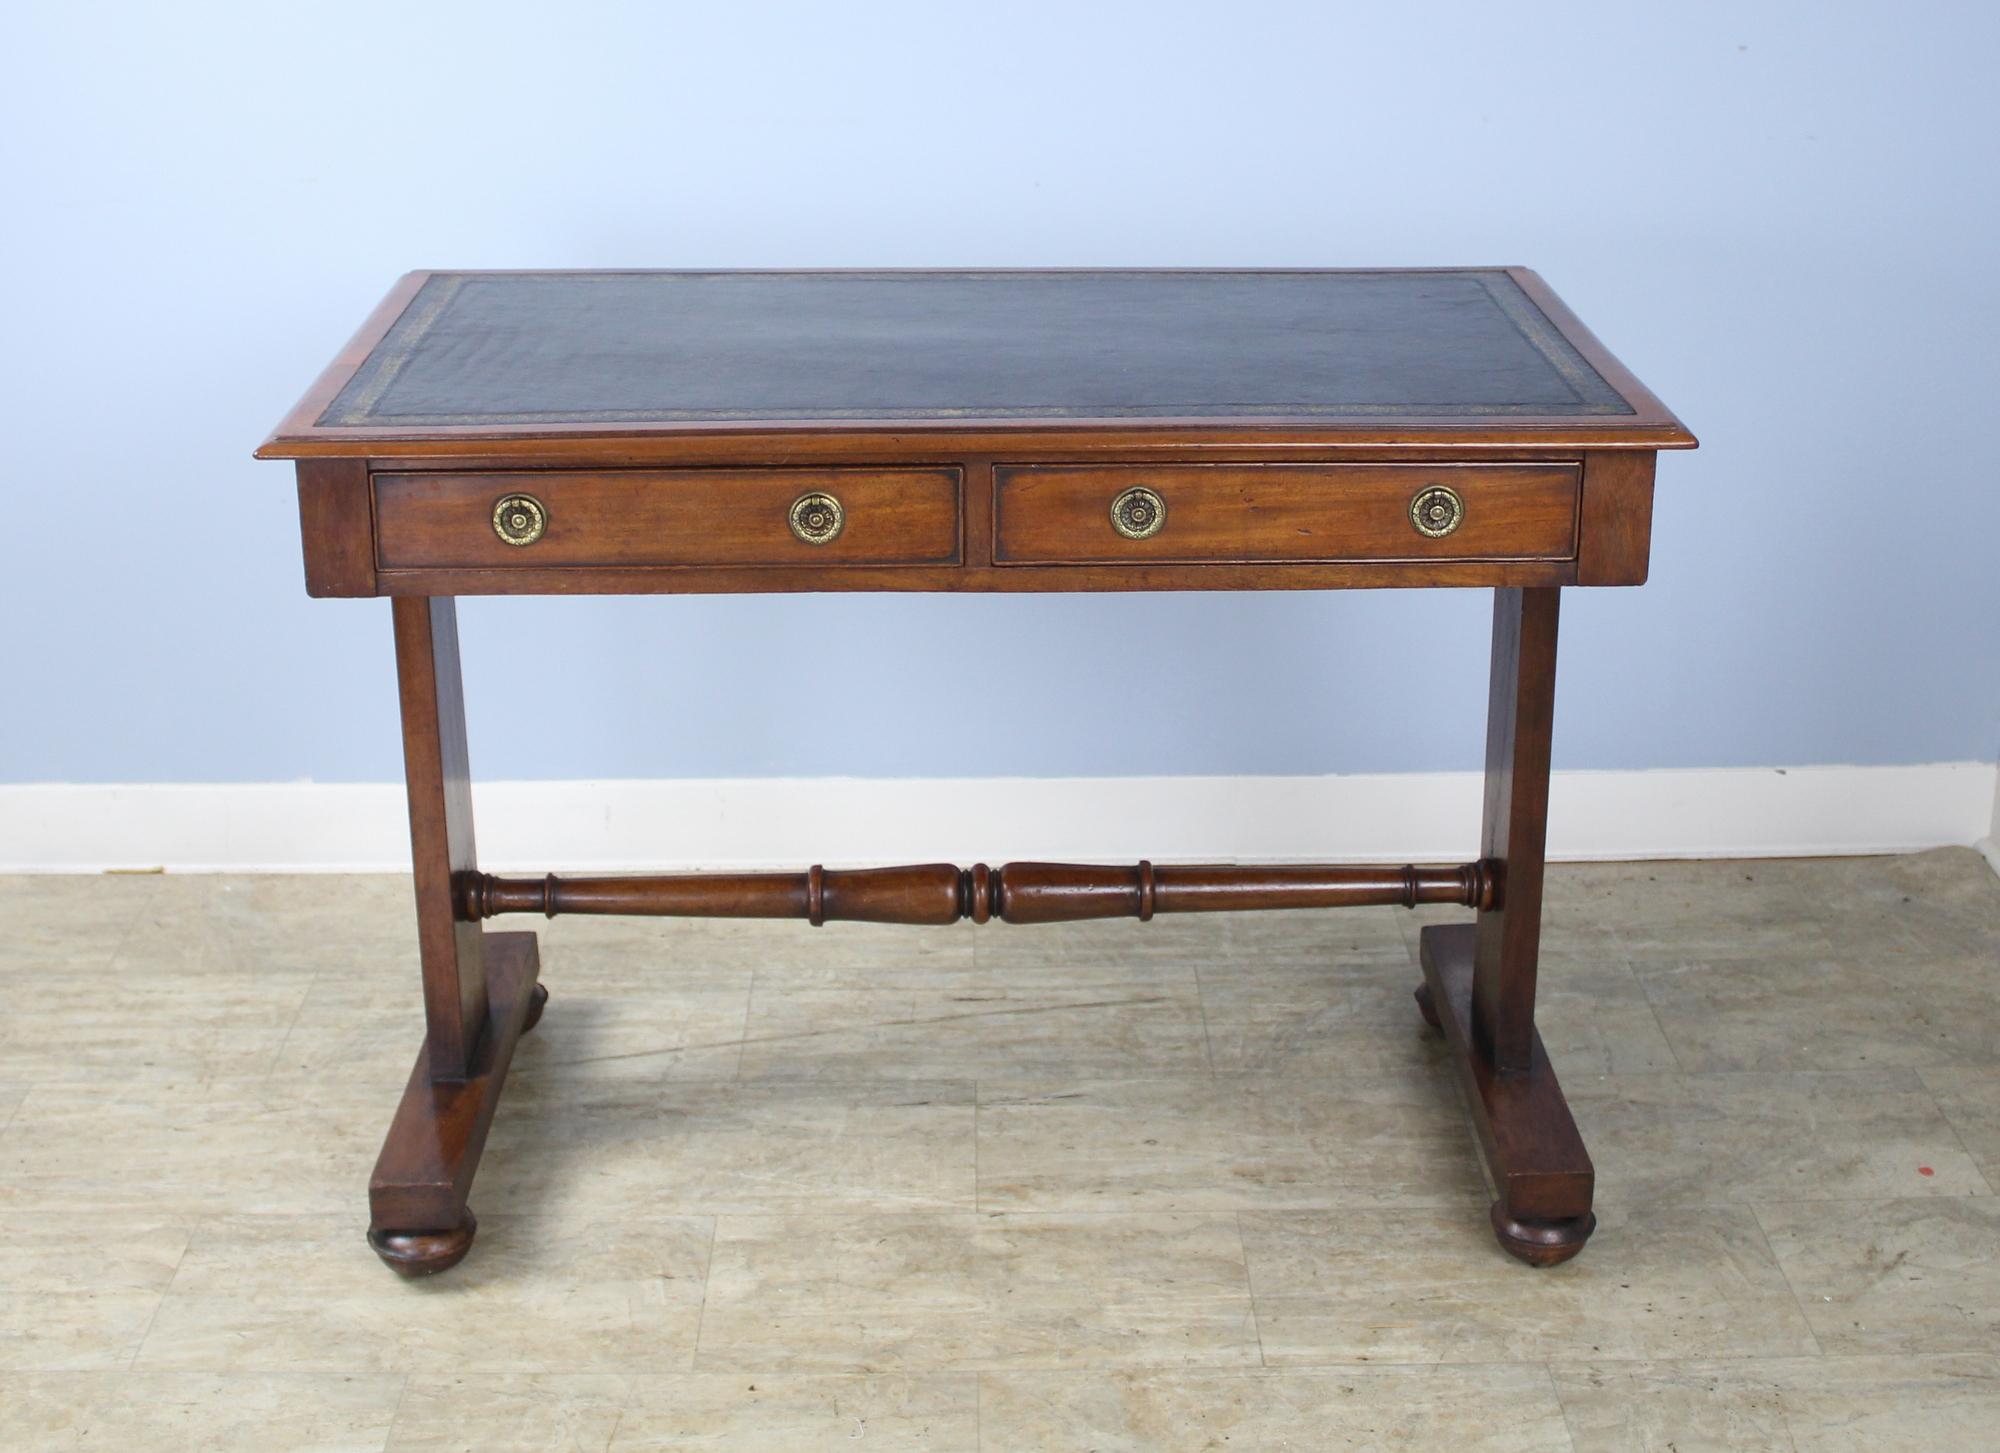 A handsome mahogany writing table or desk with new dark brown leather top. The whole piece has been lightly refinished. Two roomy drawers on one side and turned trestle base is quite handsome. Apron height is a very comfortable 25 inches.